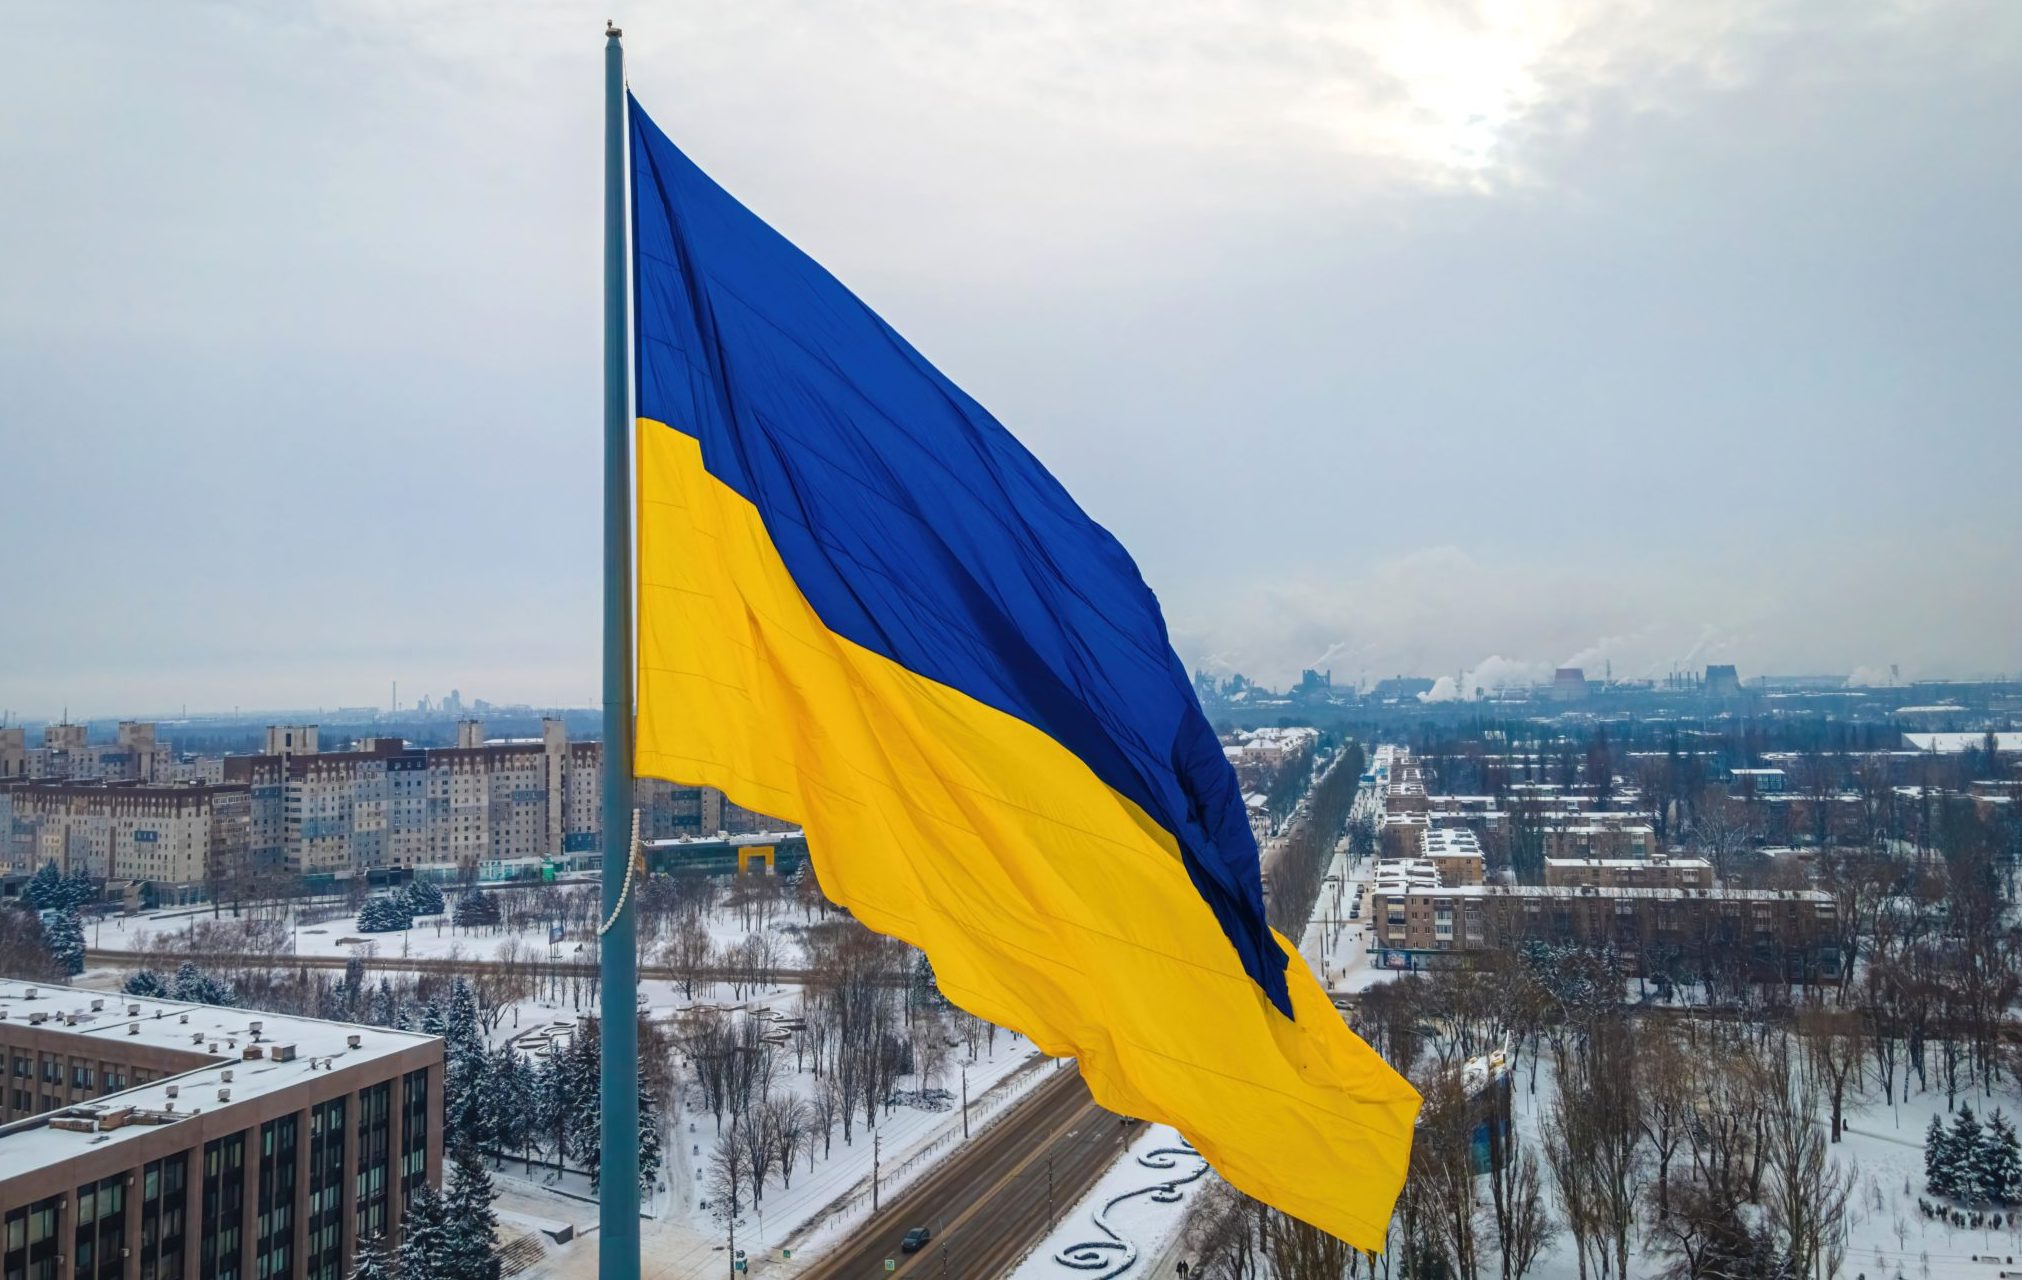 The,Aerial,View,Of,The,Ukraine,Flag,In,Winter